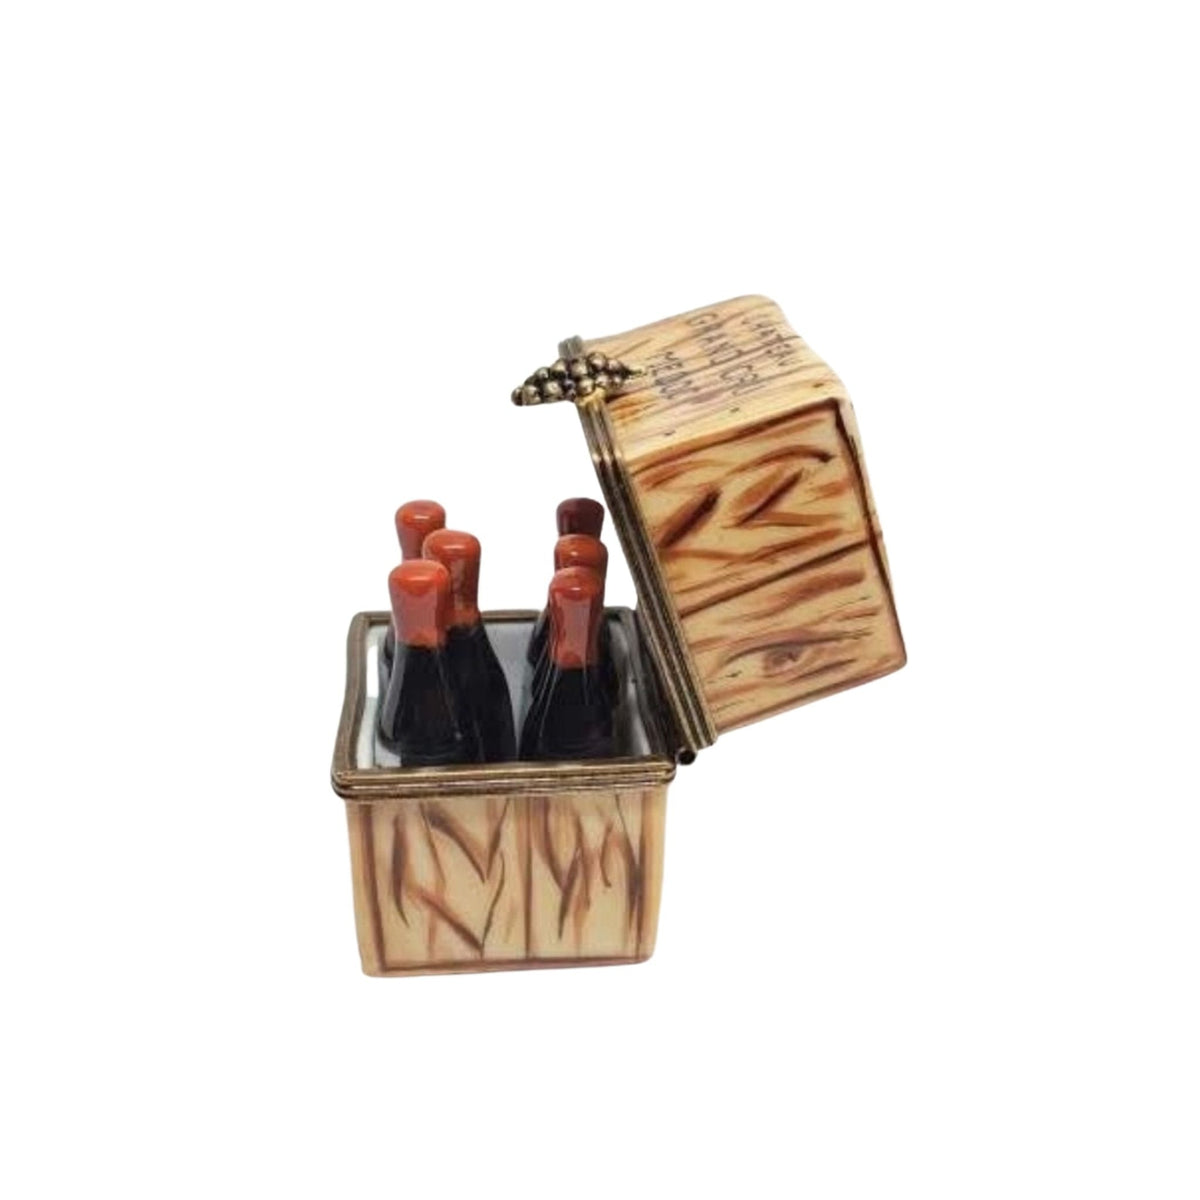 Wine enthusiast's dream: 6-bottle wine crate collection